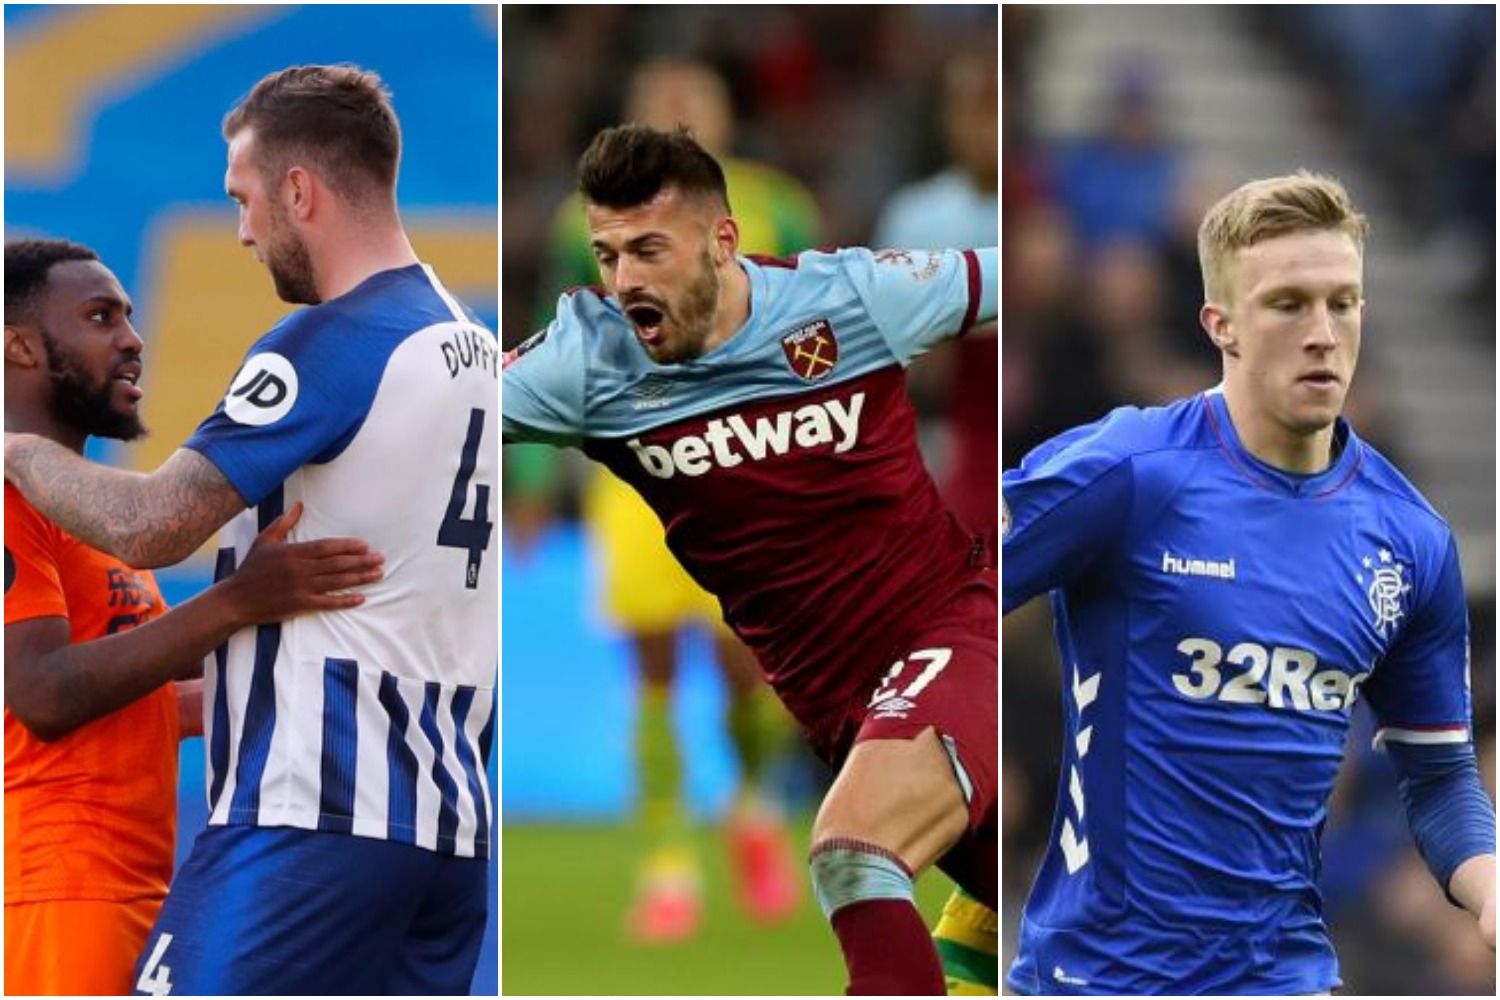 Scottish transfer news as it happens: Rangers' Kamara 'wanted' by Newcastle | Ajeti to Celtic confirmed | Hoops 'lead chase' for Oli Burke